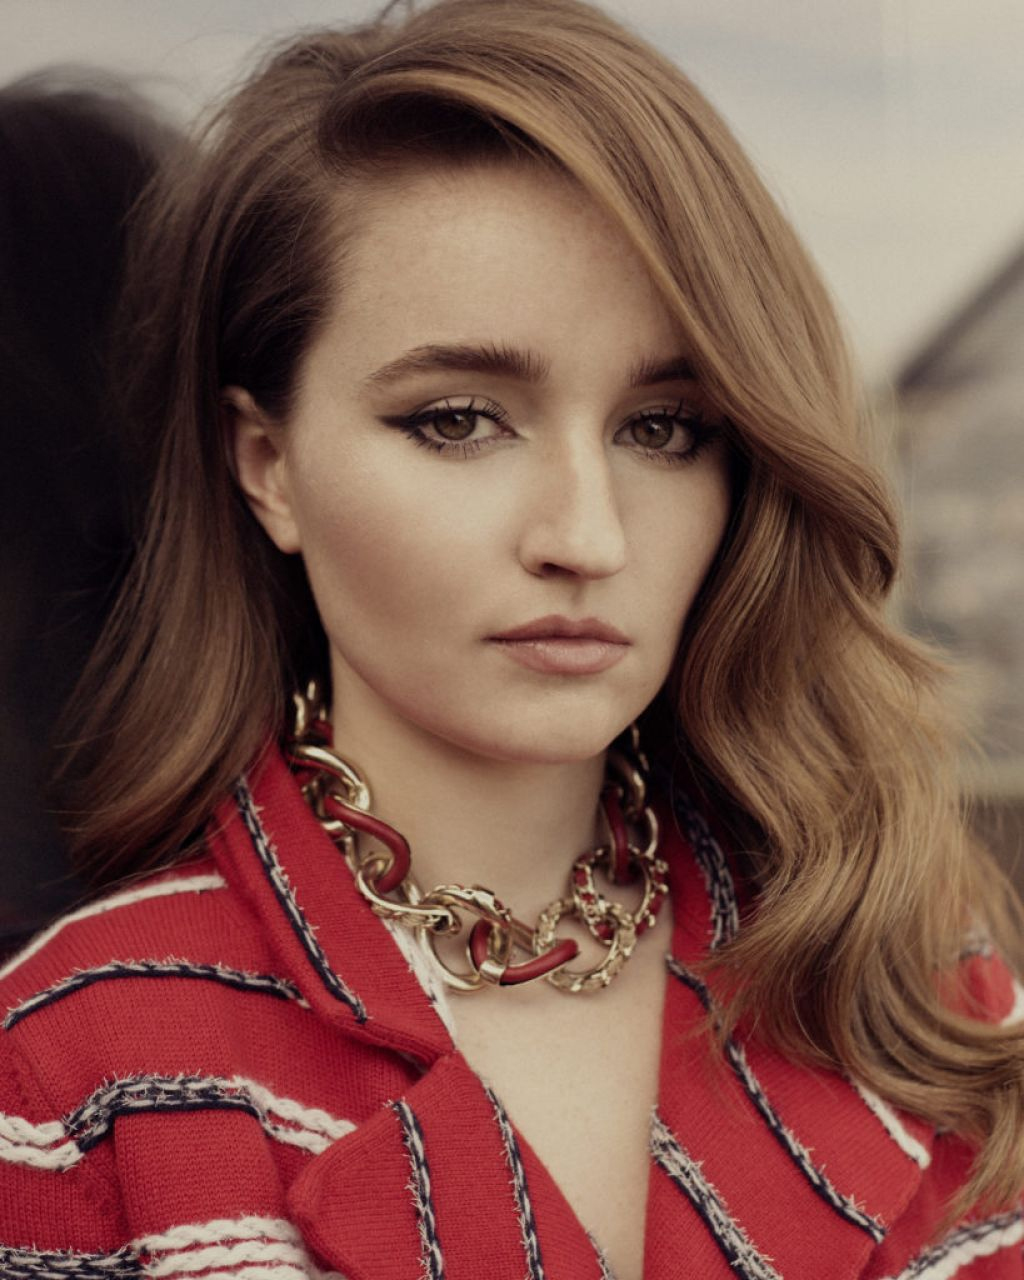 Kaitlyn Dever - Contents Photoshoot - 2020